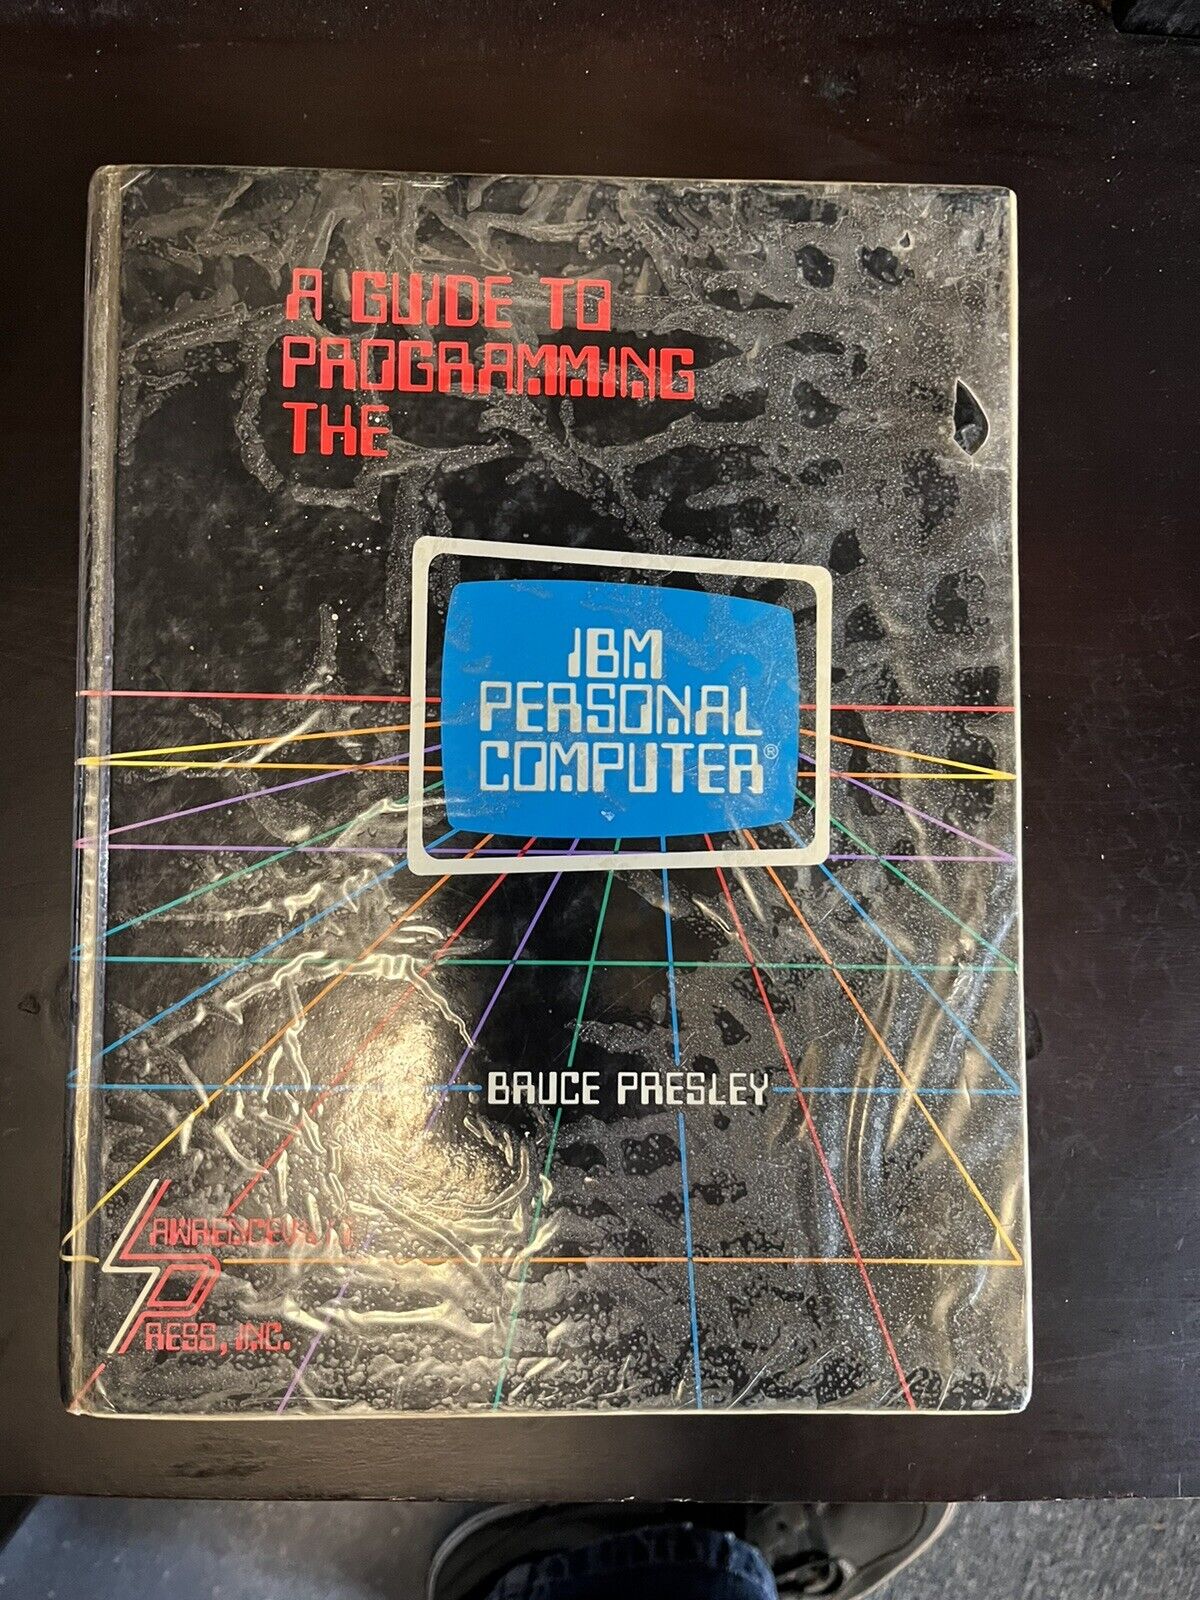 PERSONAL GUIDE TO PROGRAMING THE IBM PERSONAL COMPUTER BOOK 1982 BRUCE PRESLEY